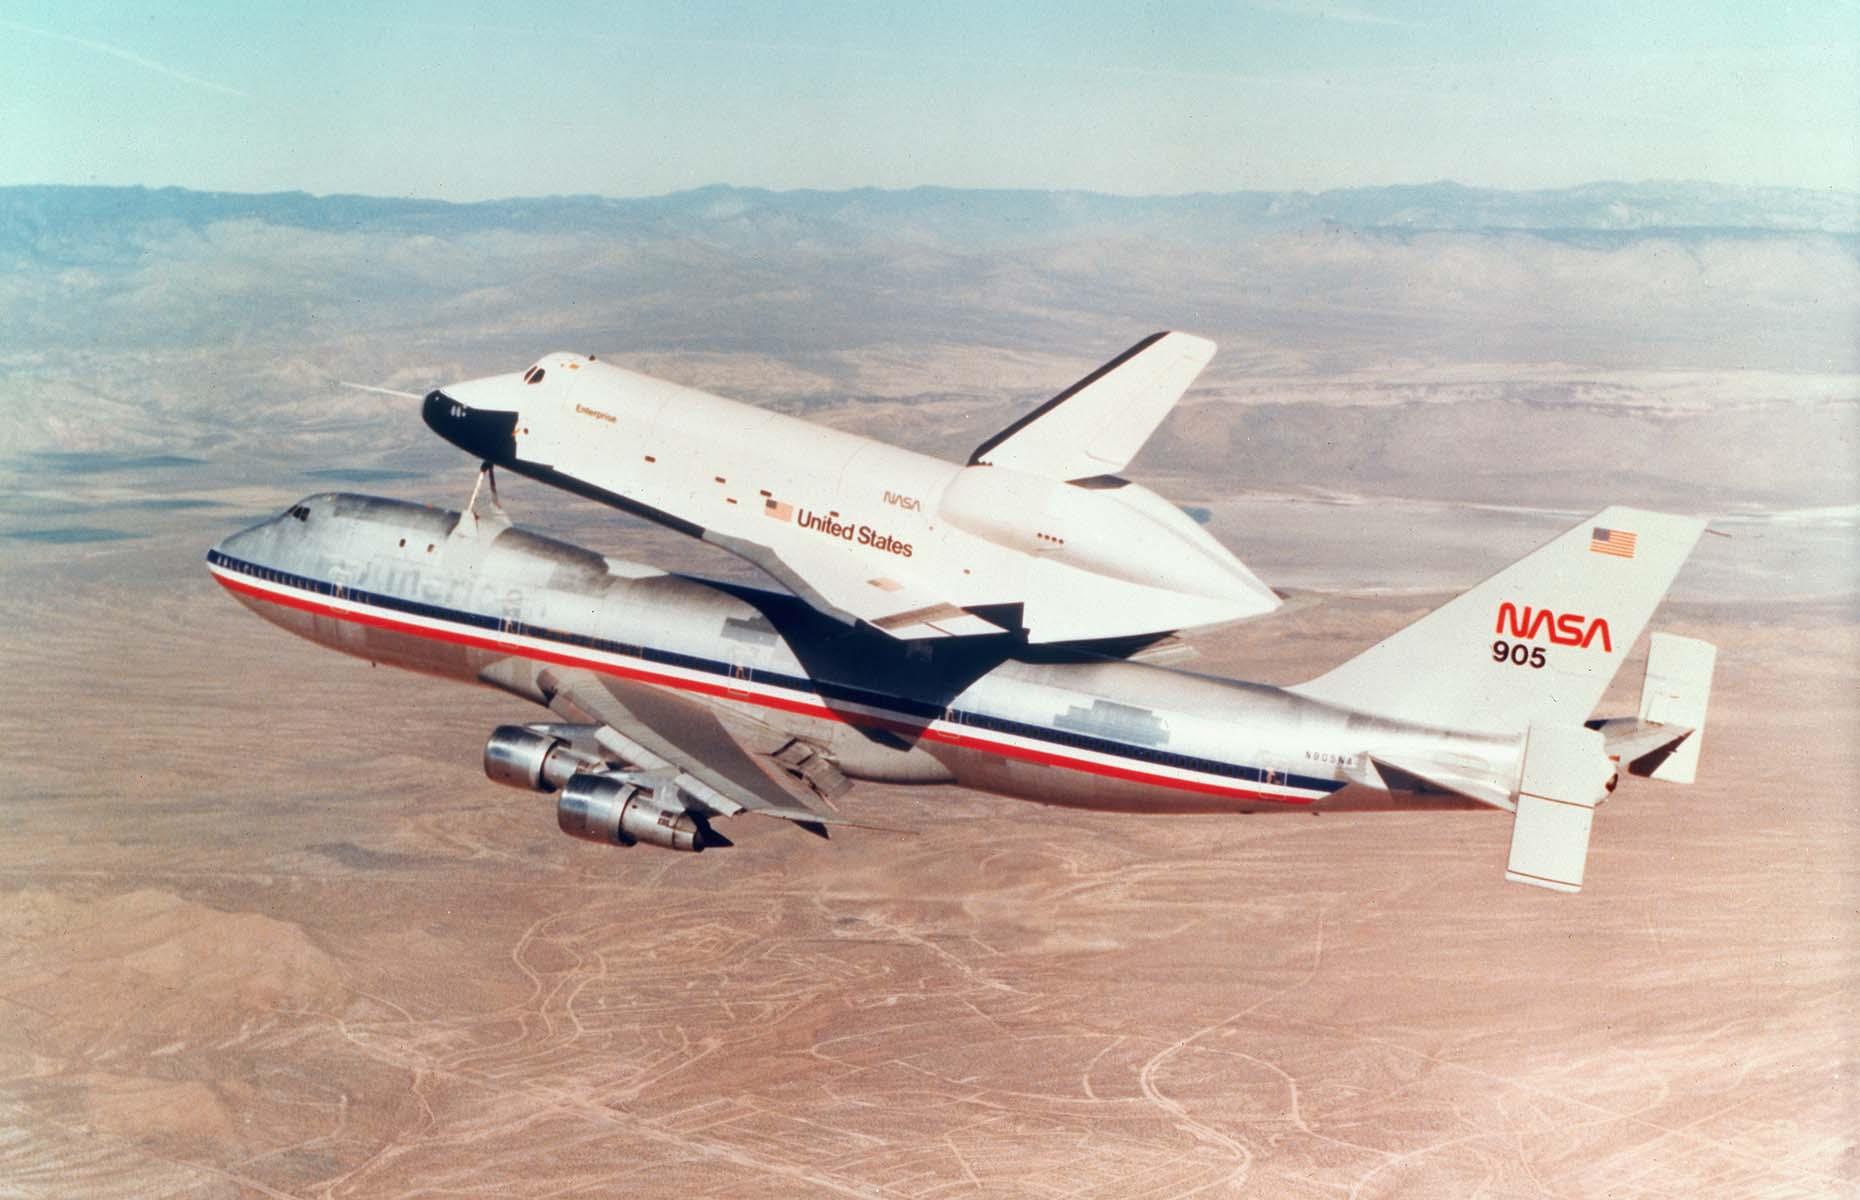 The original jumbo jet, Boeing 747 held the passenger capacity record for 37 years and was more than twice the size of any other airliner at the time. A masterpiece of industrial design, this behemoth famously transported the Space Shuttle on its back in 2012, when the Endeavour spacecraft was moved from the Kennedy Space Center in Florida to Los Angeles, California.